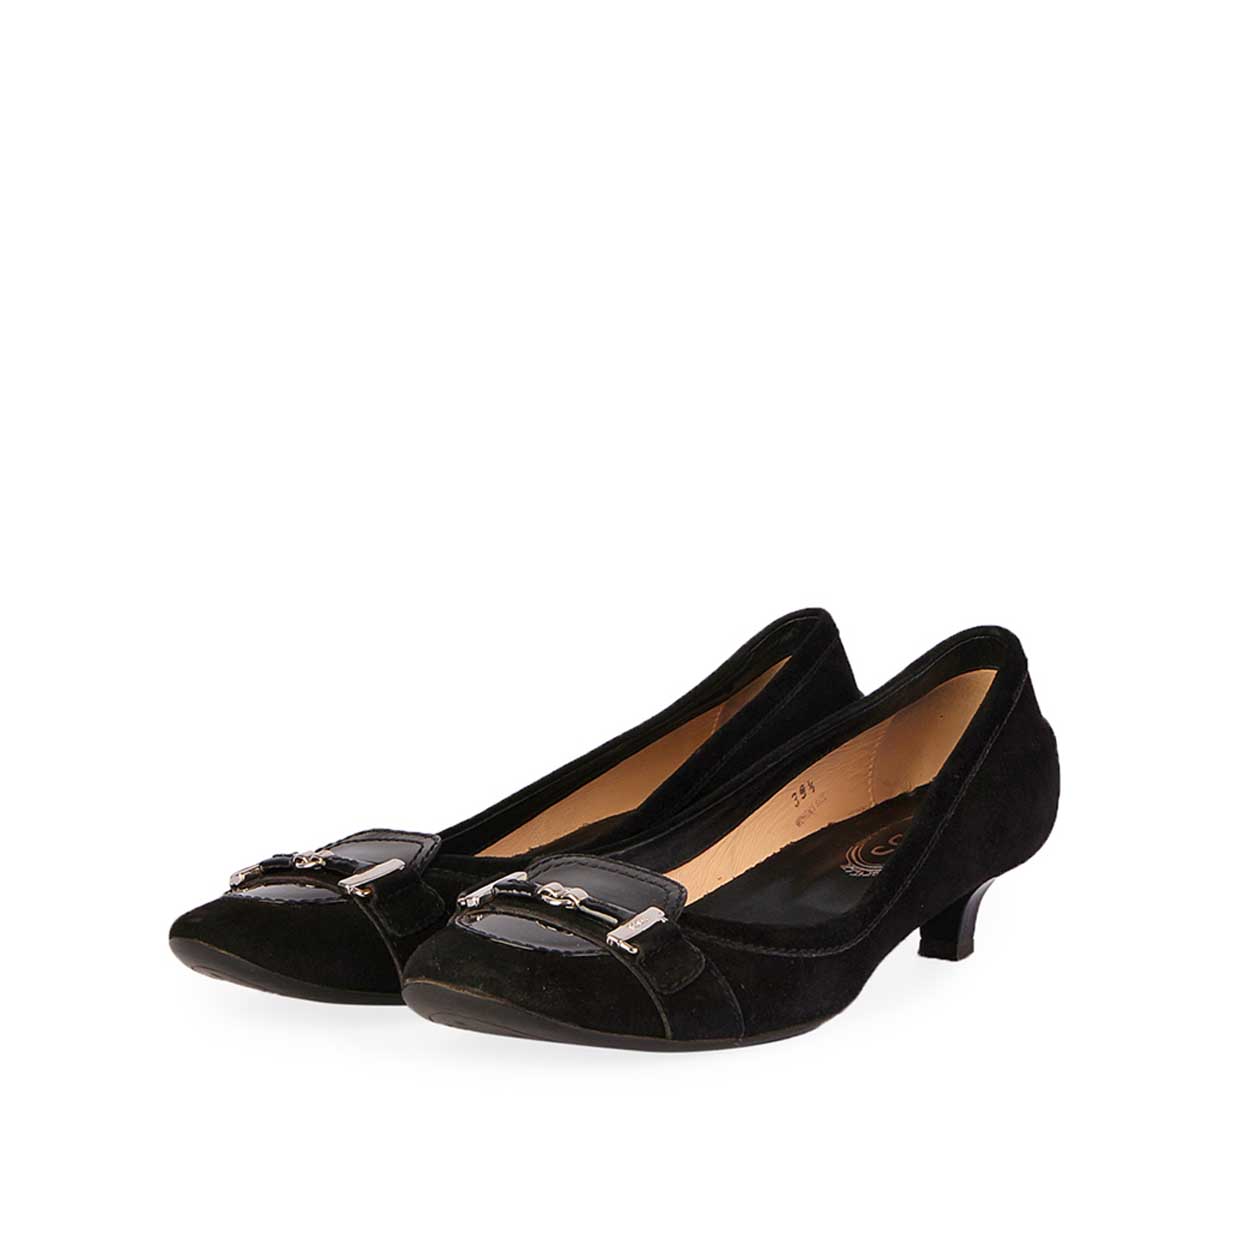 TOD'S Suede and Patent Leather Kitten Heels Black – S: 39.5 (6.5 